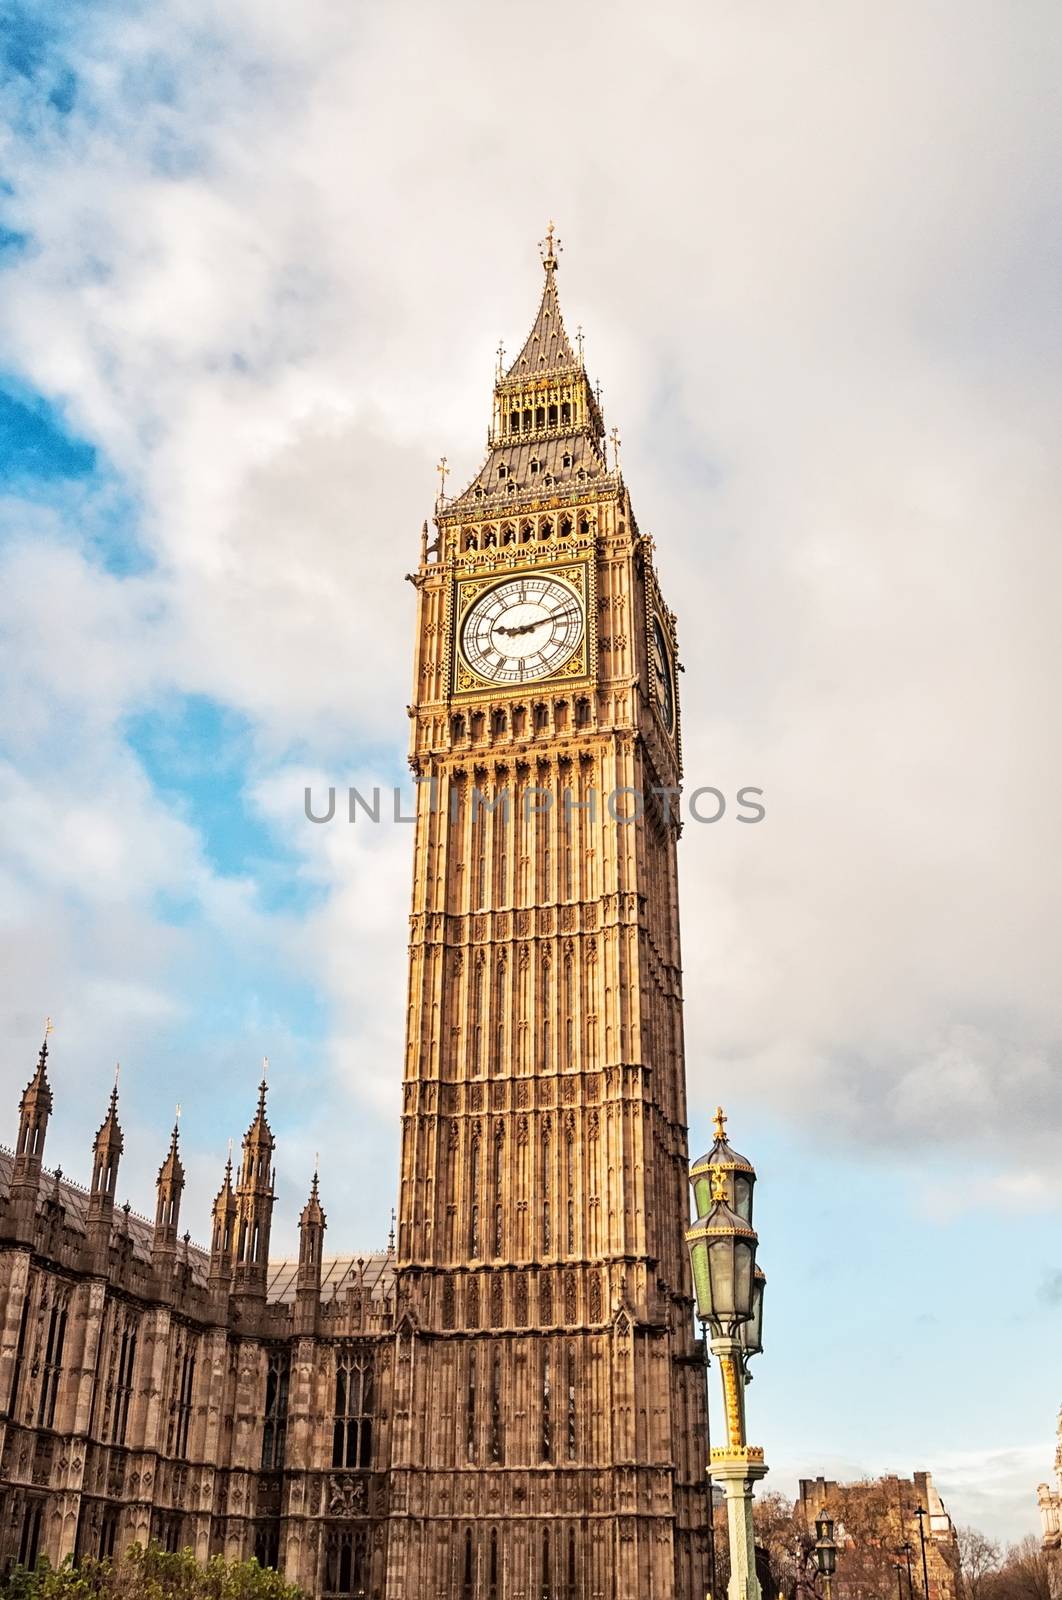 Big Ben is the nickname for the Great Bell of the clock at the north end of the Palace of Westminster in London